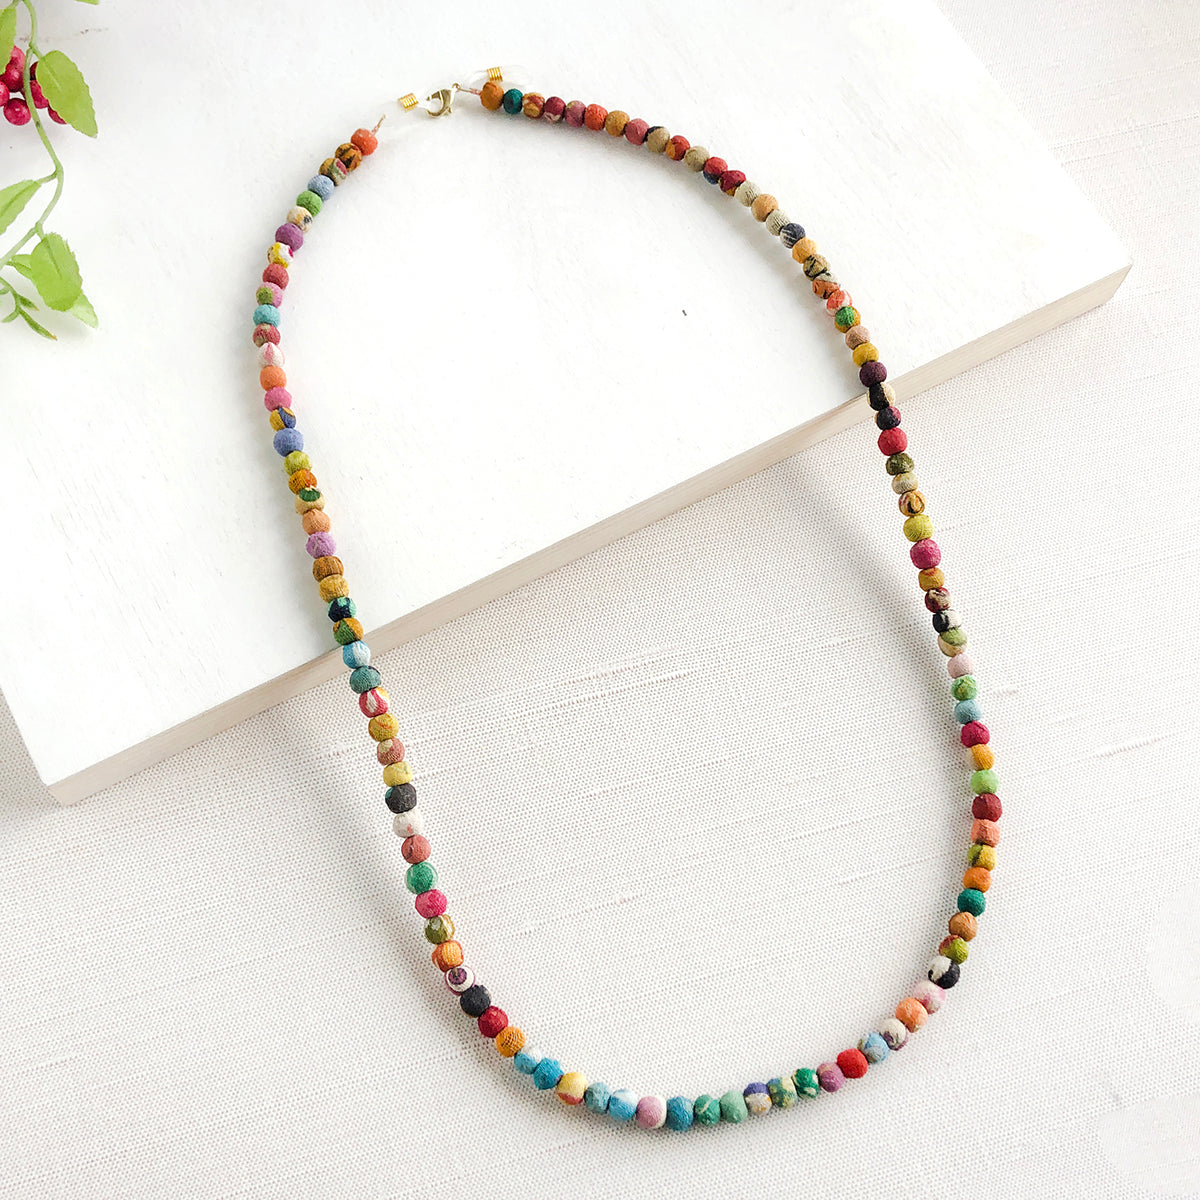 Kantha Eyeglass Chain can be worn as a necklace.